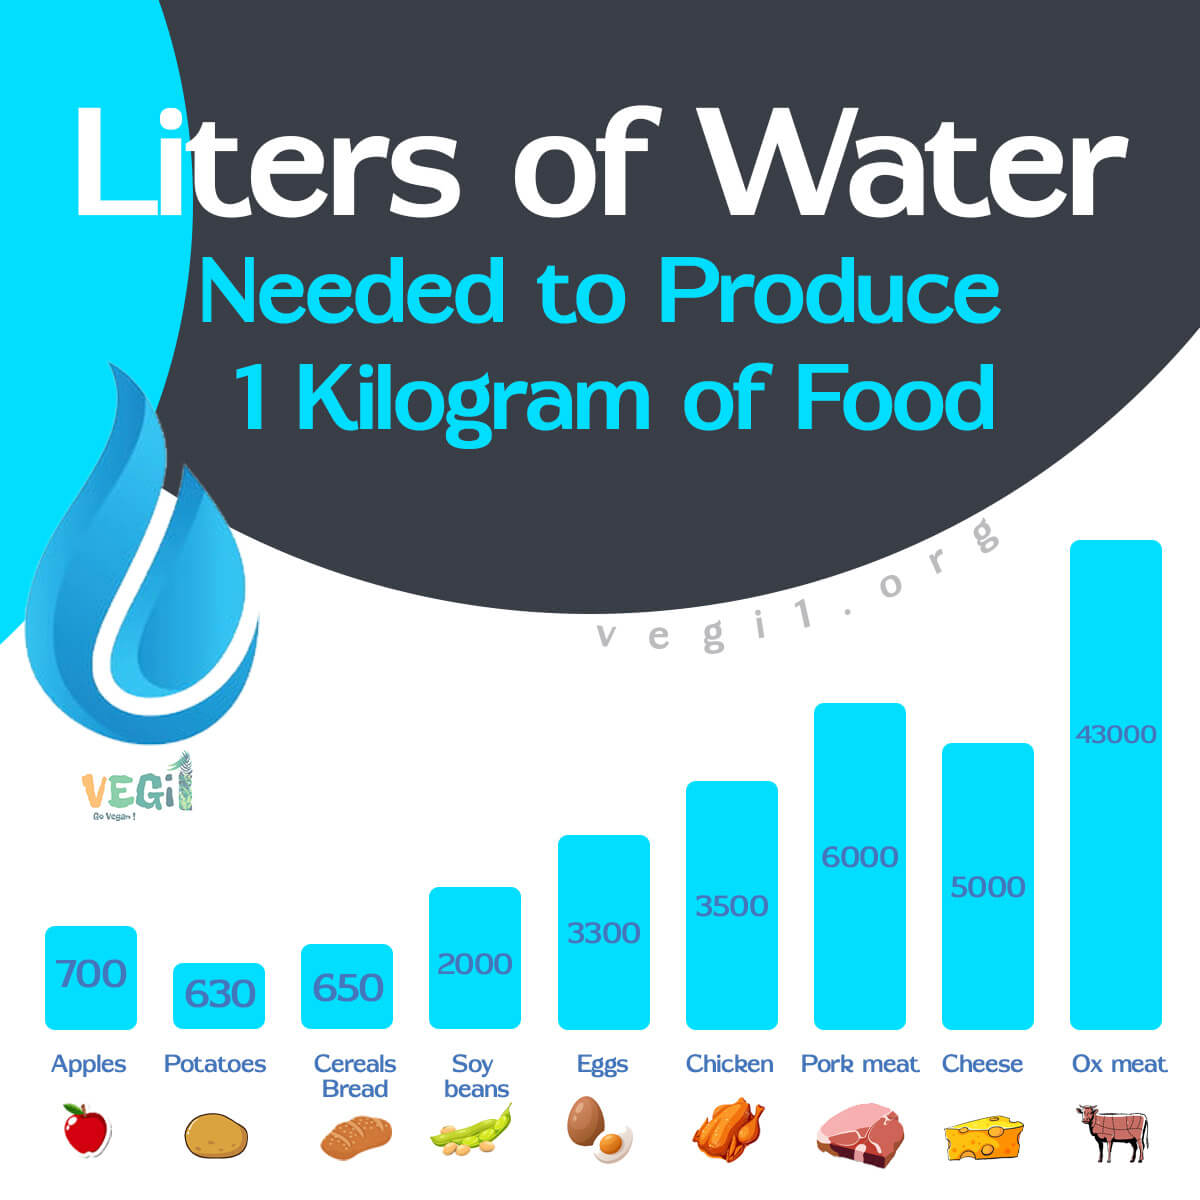 Make a conscious choice and switch to a vegan diet to conserve our precious water resources.